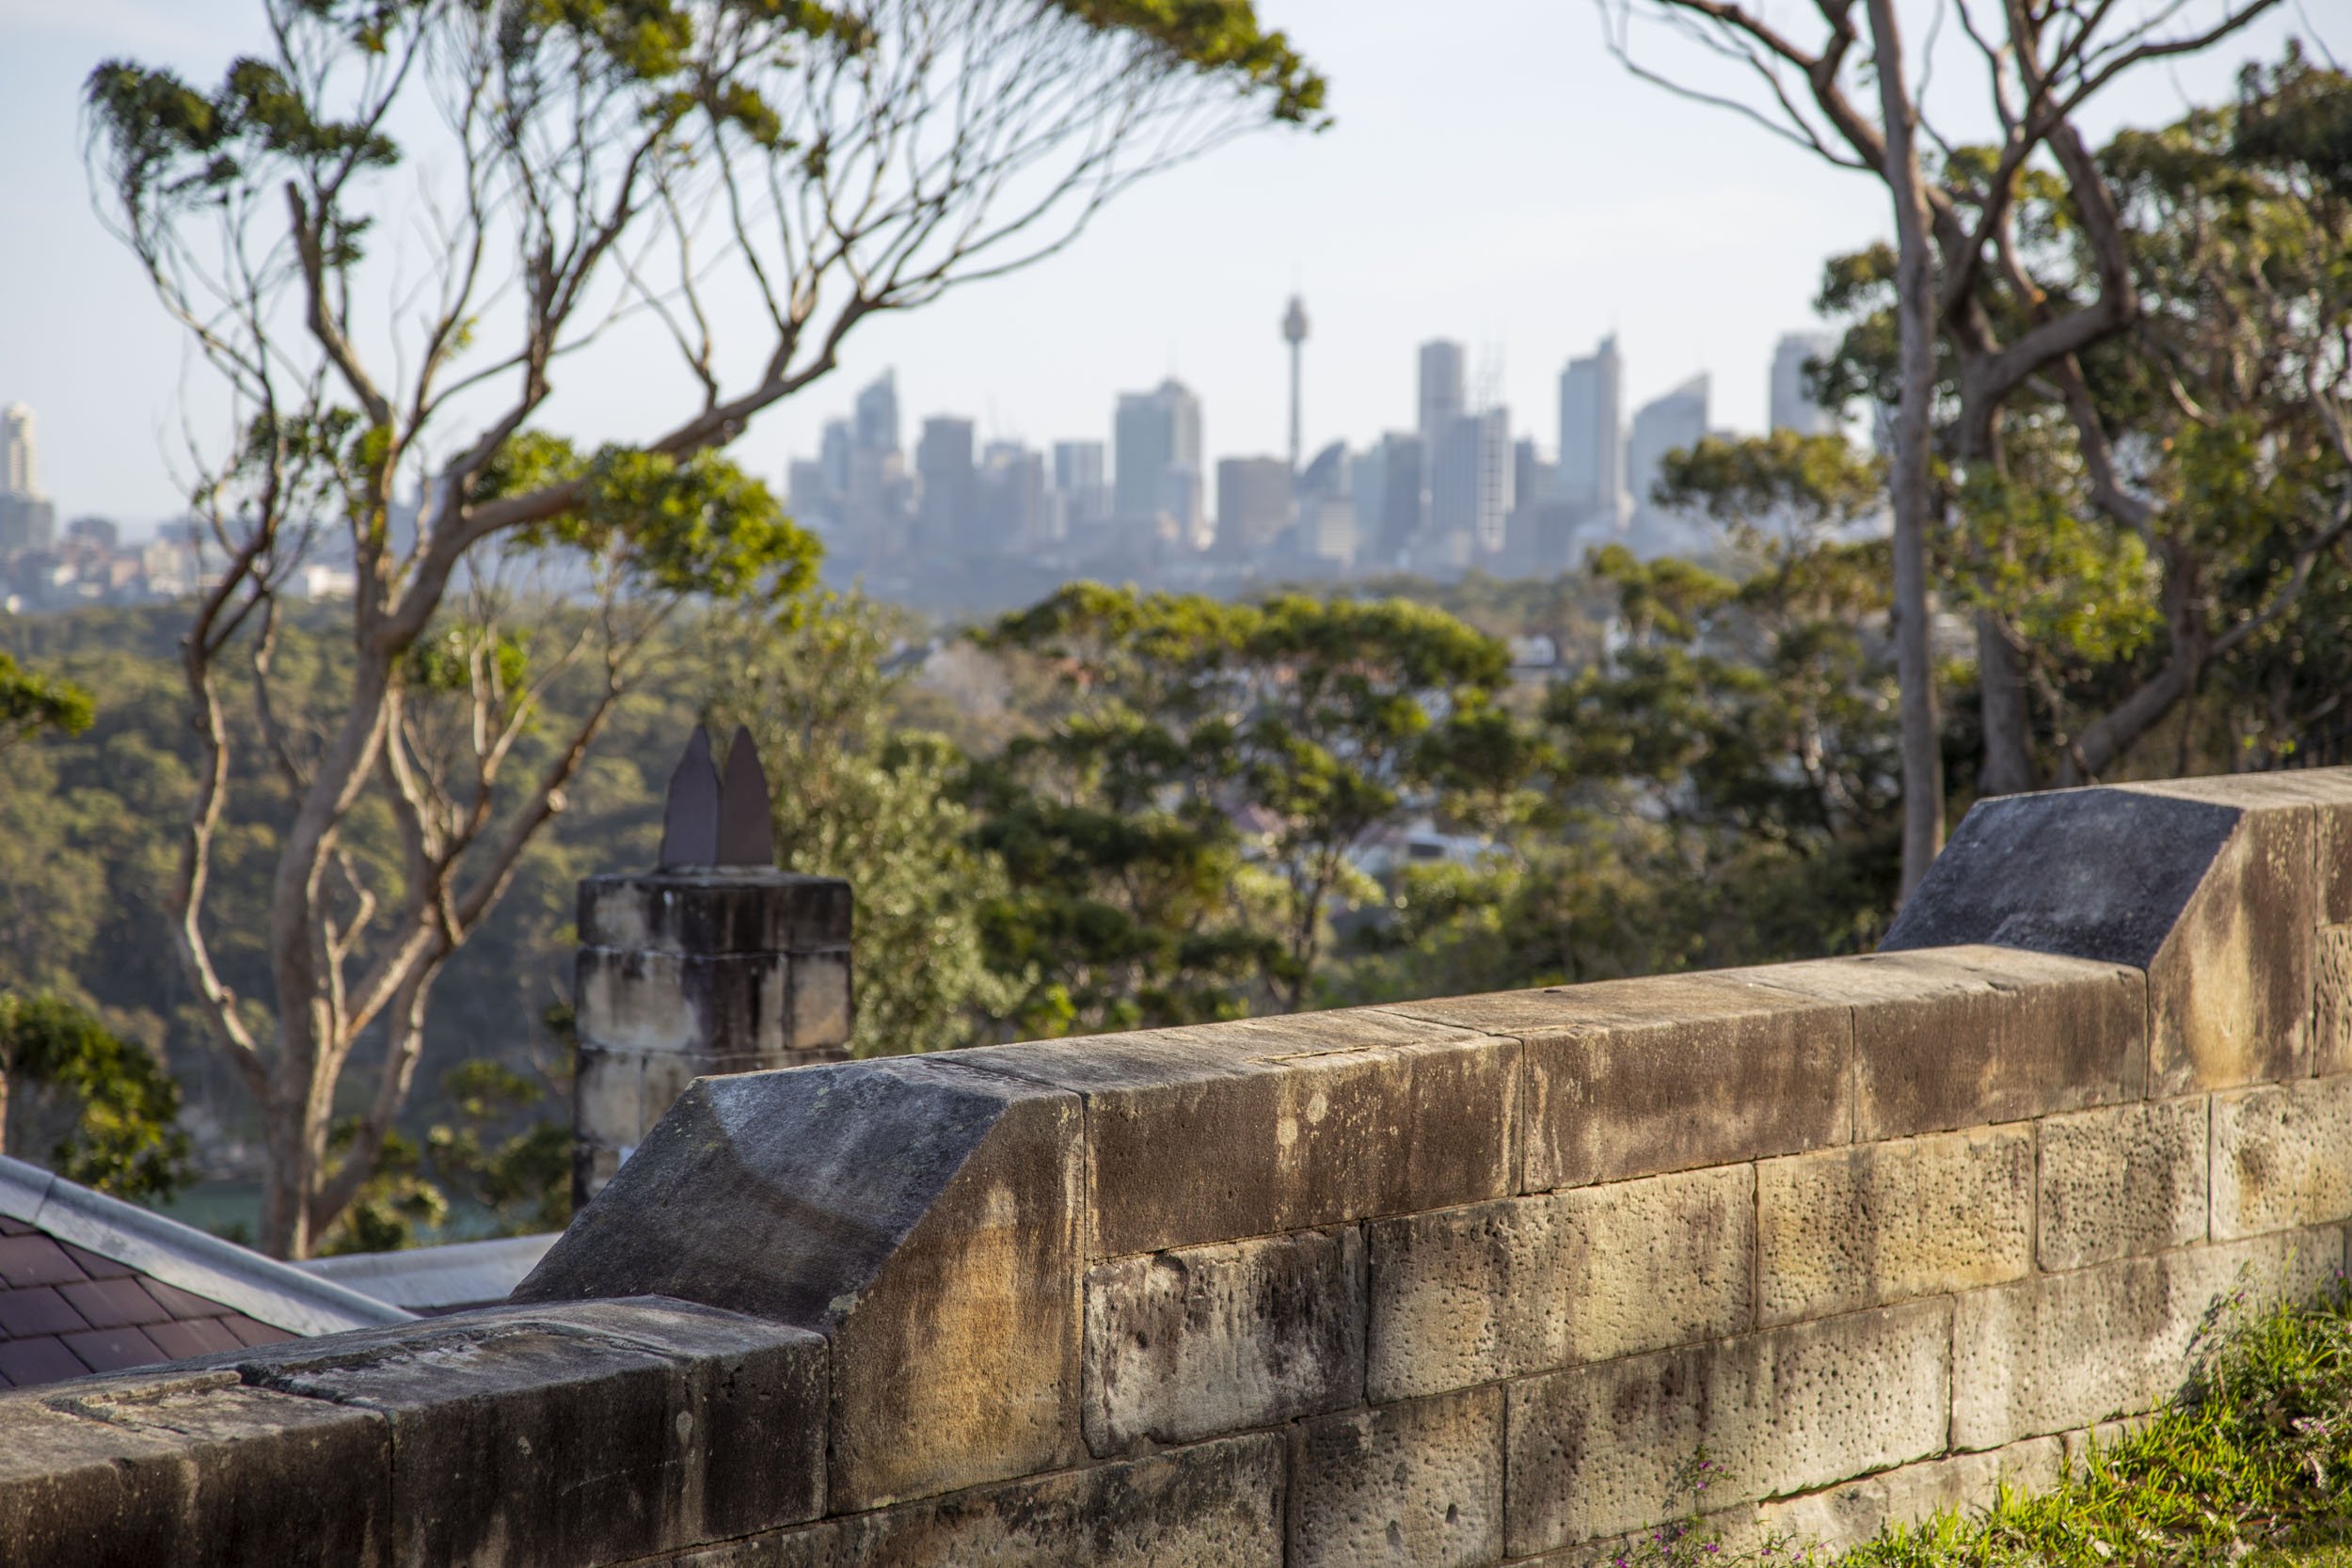 Middle Head's heritage protects public land and Sydney's history.